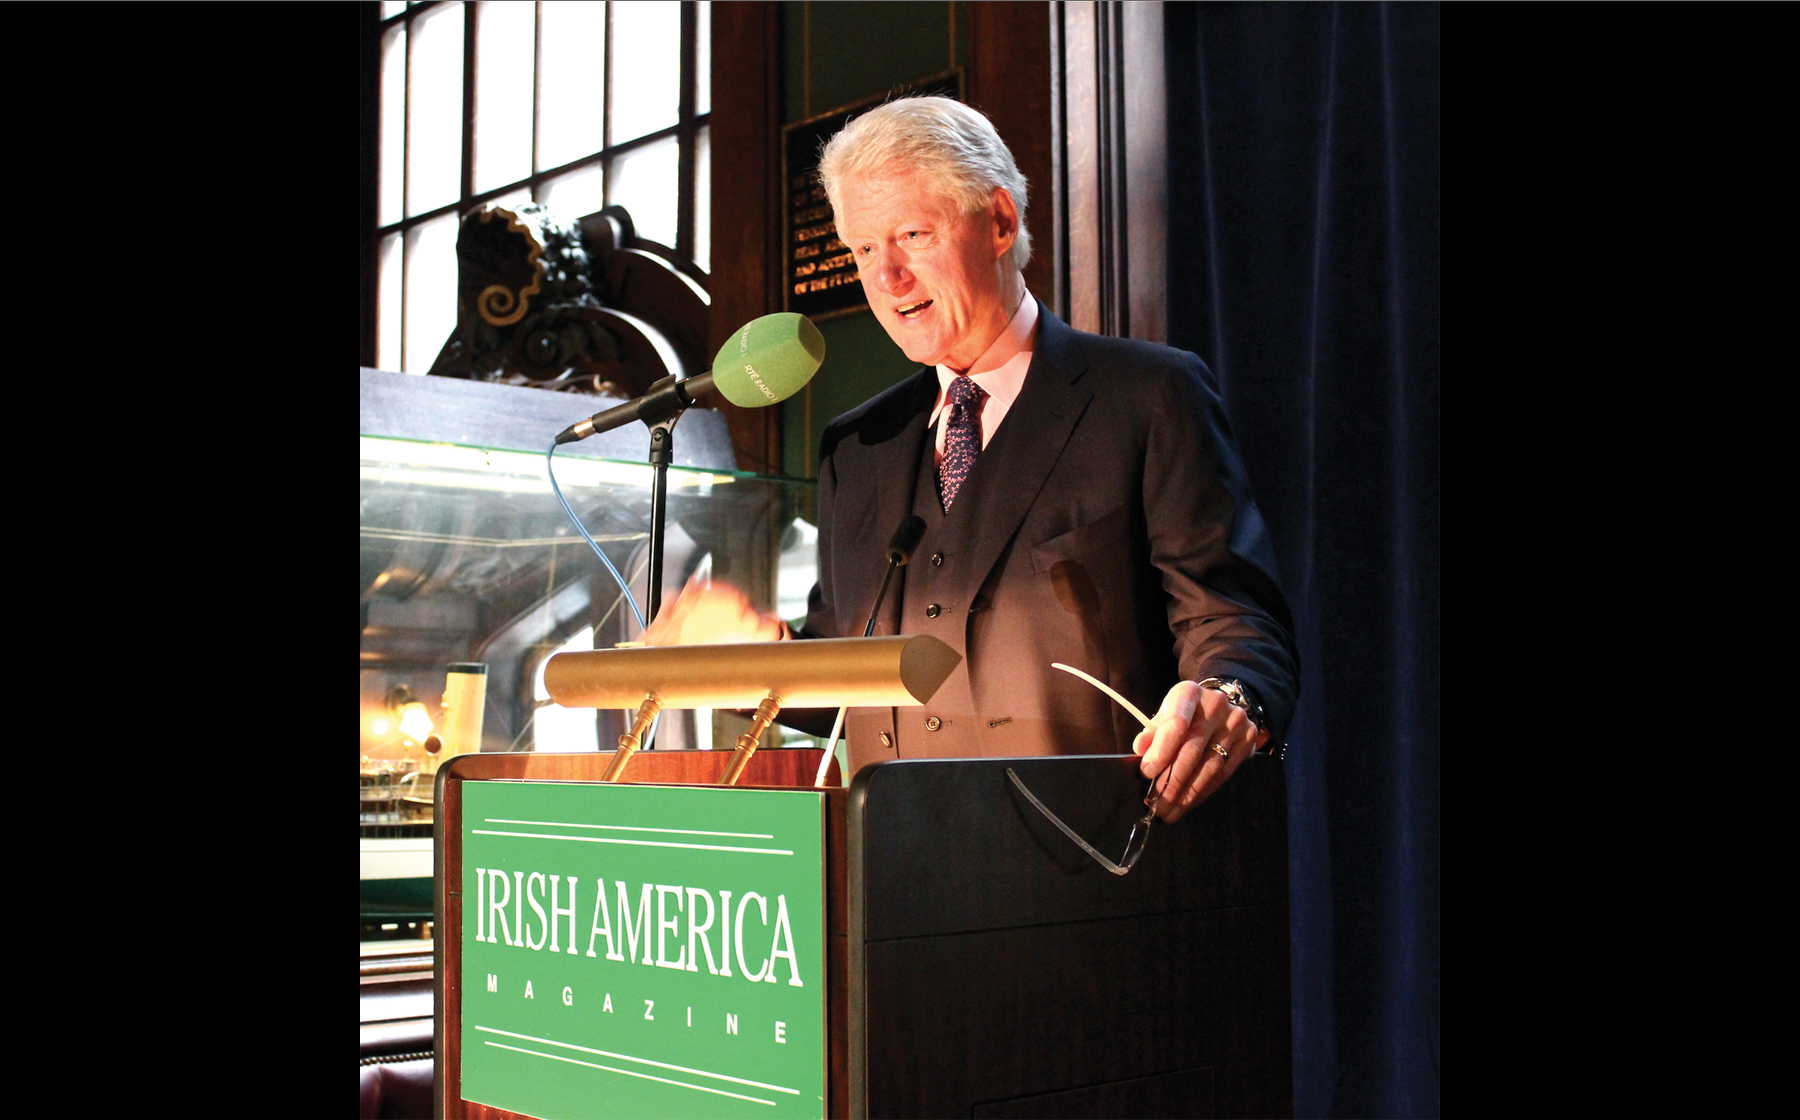 Former President Bill Clinton is inducted into the Irish America Hall of Fame in March, 2011.